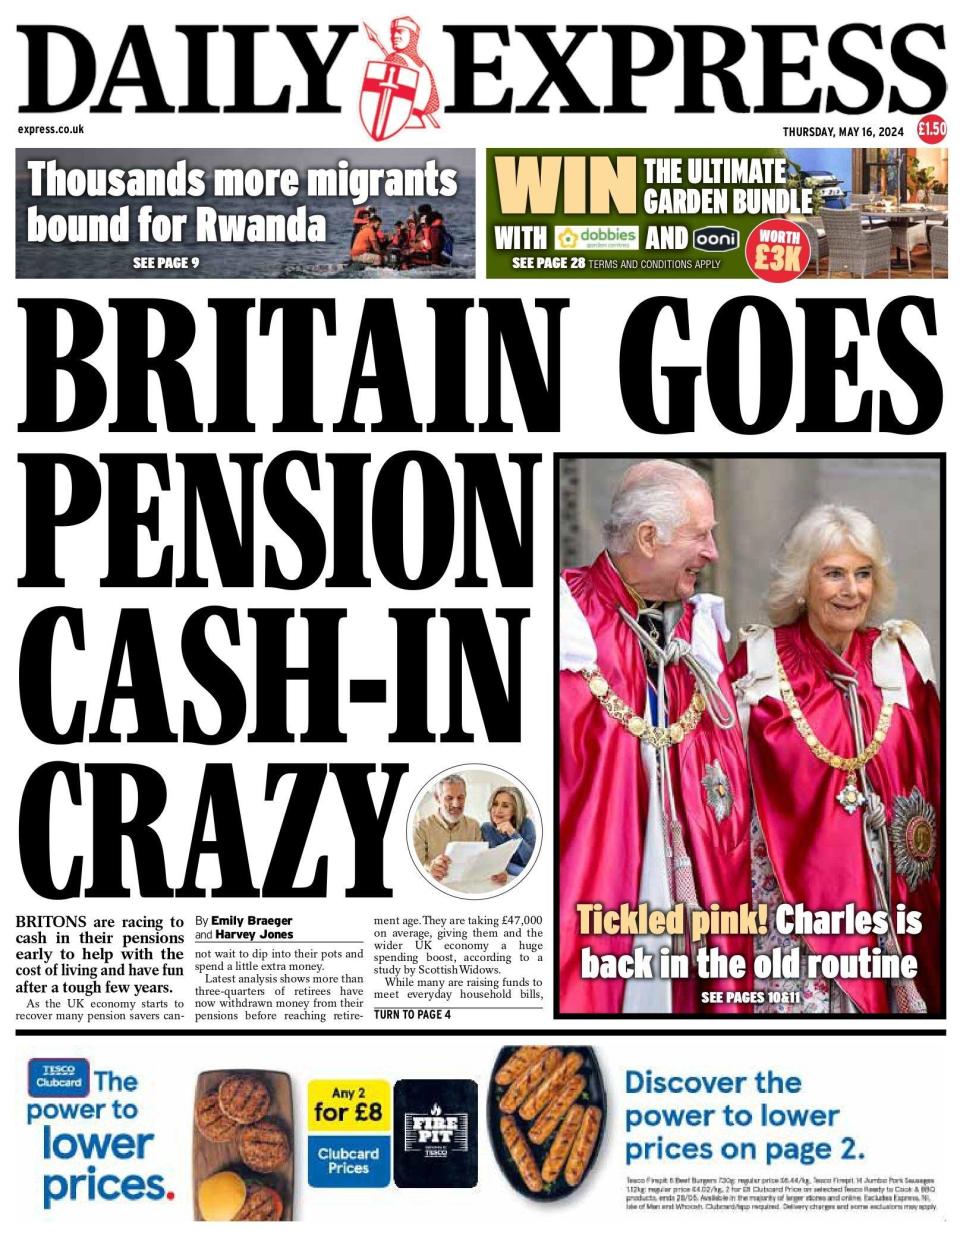 Daily Express: Britain goes pension cash-in crazy